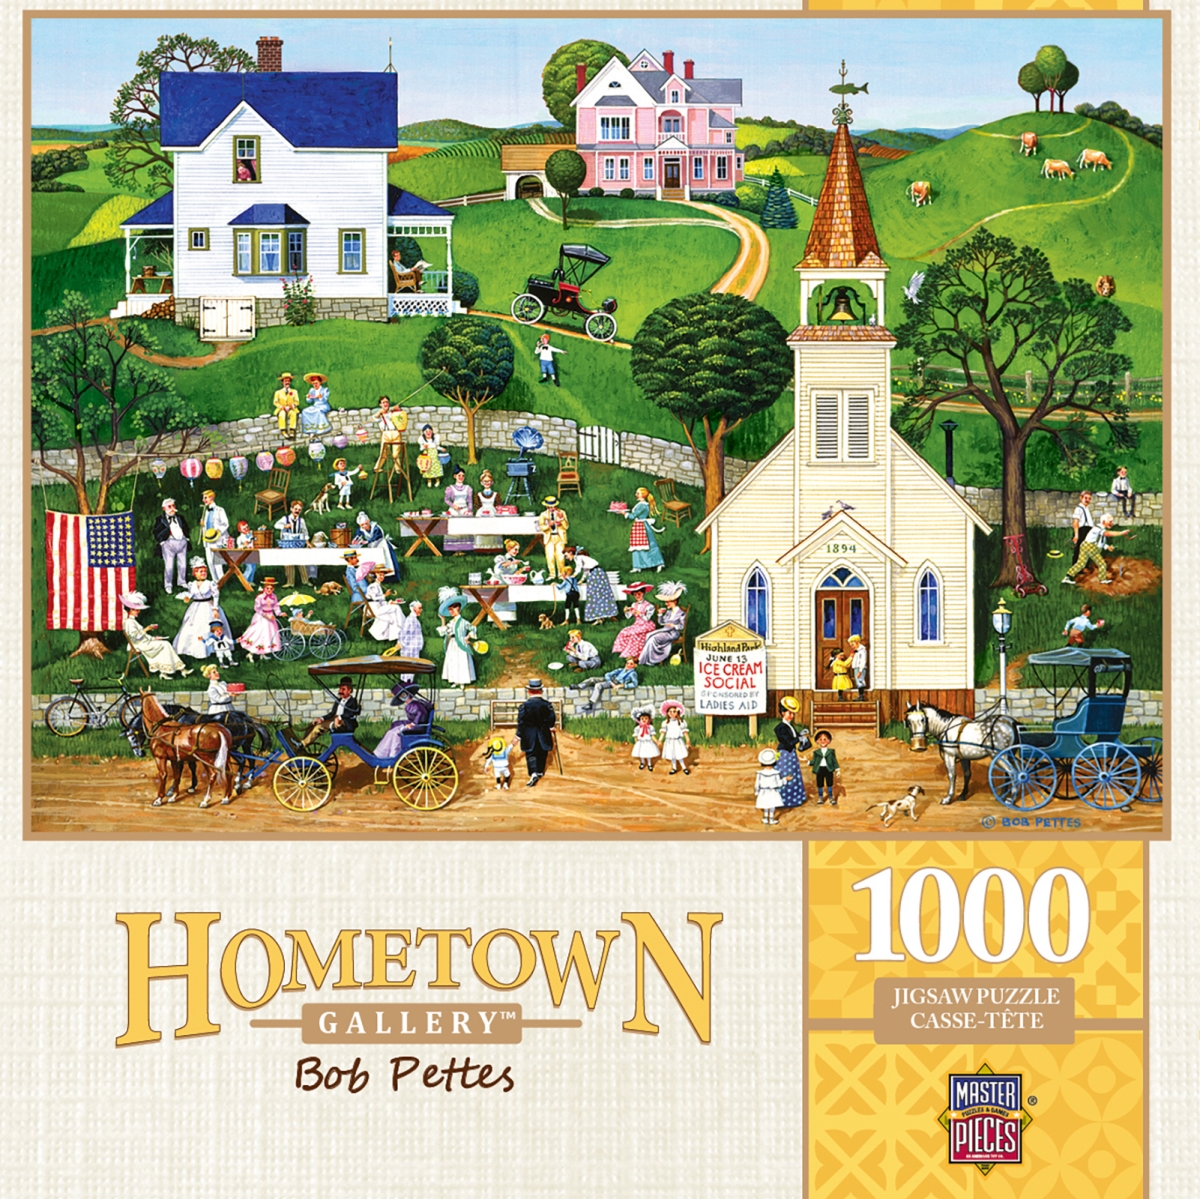 71956 19.25 X 26.75 In. Hometown Gallery Strawberry Sunday Jigsaw Puzzle - 1000 Piece